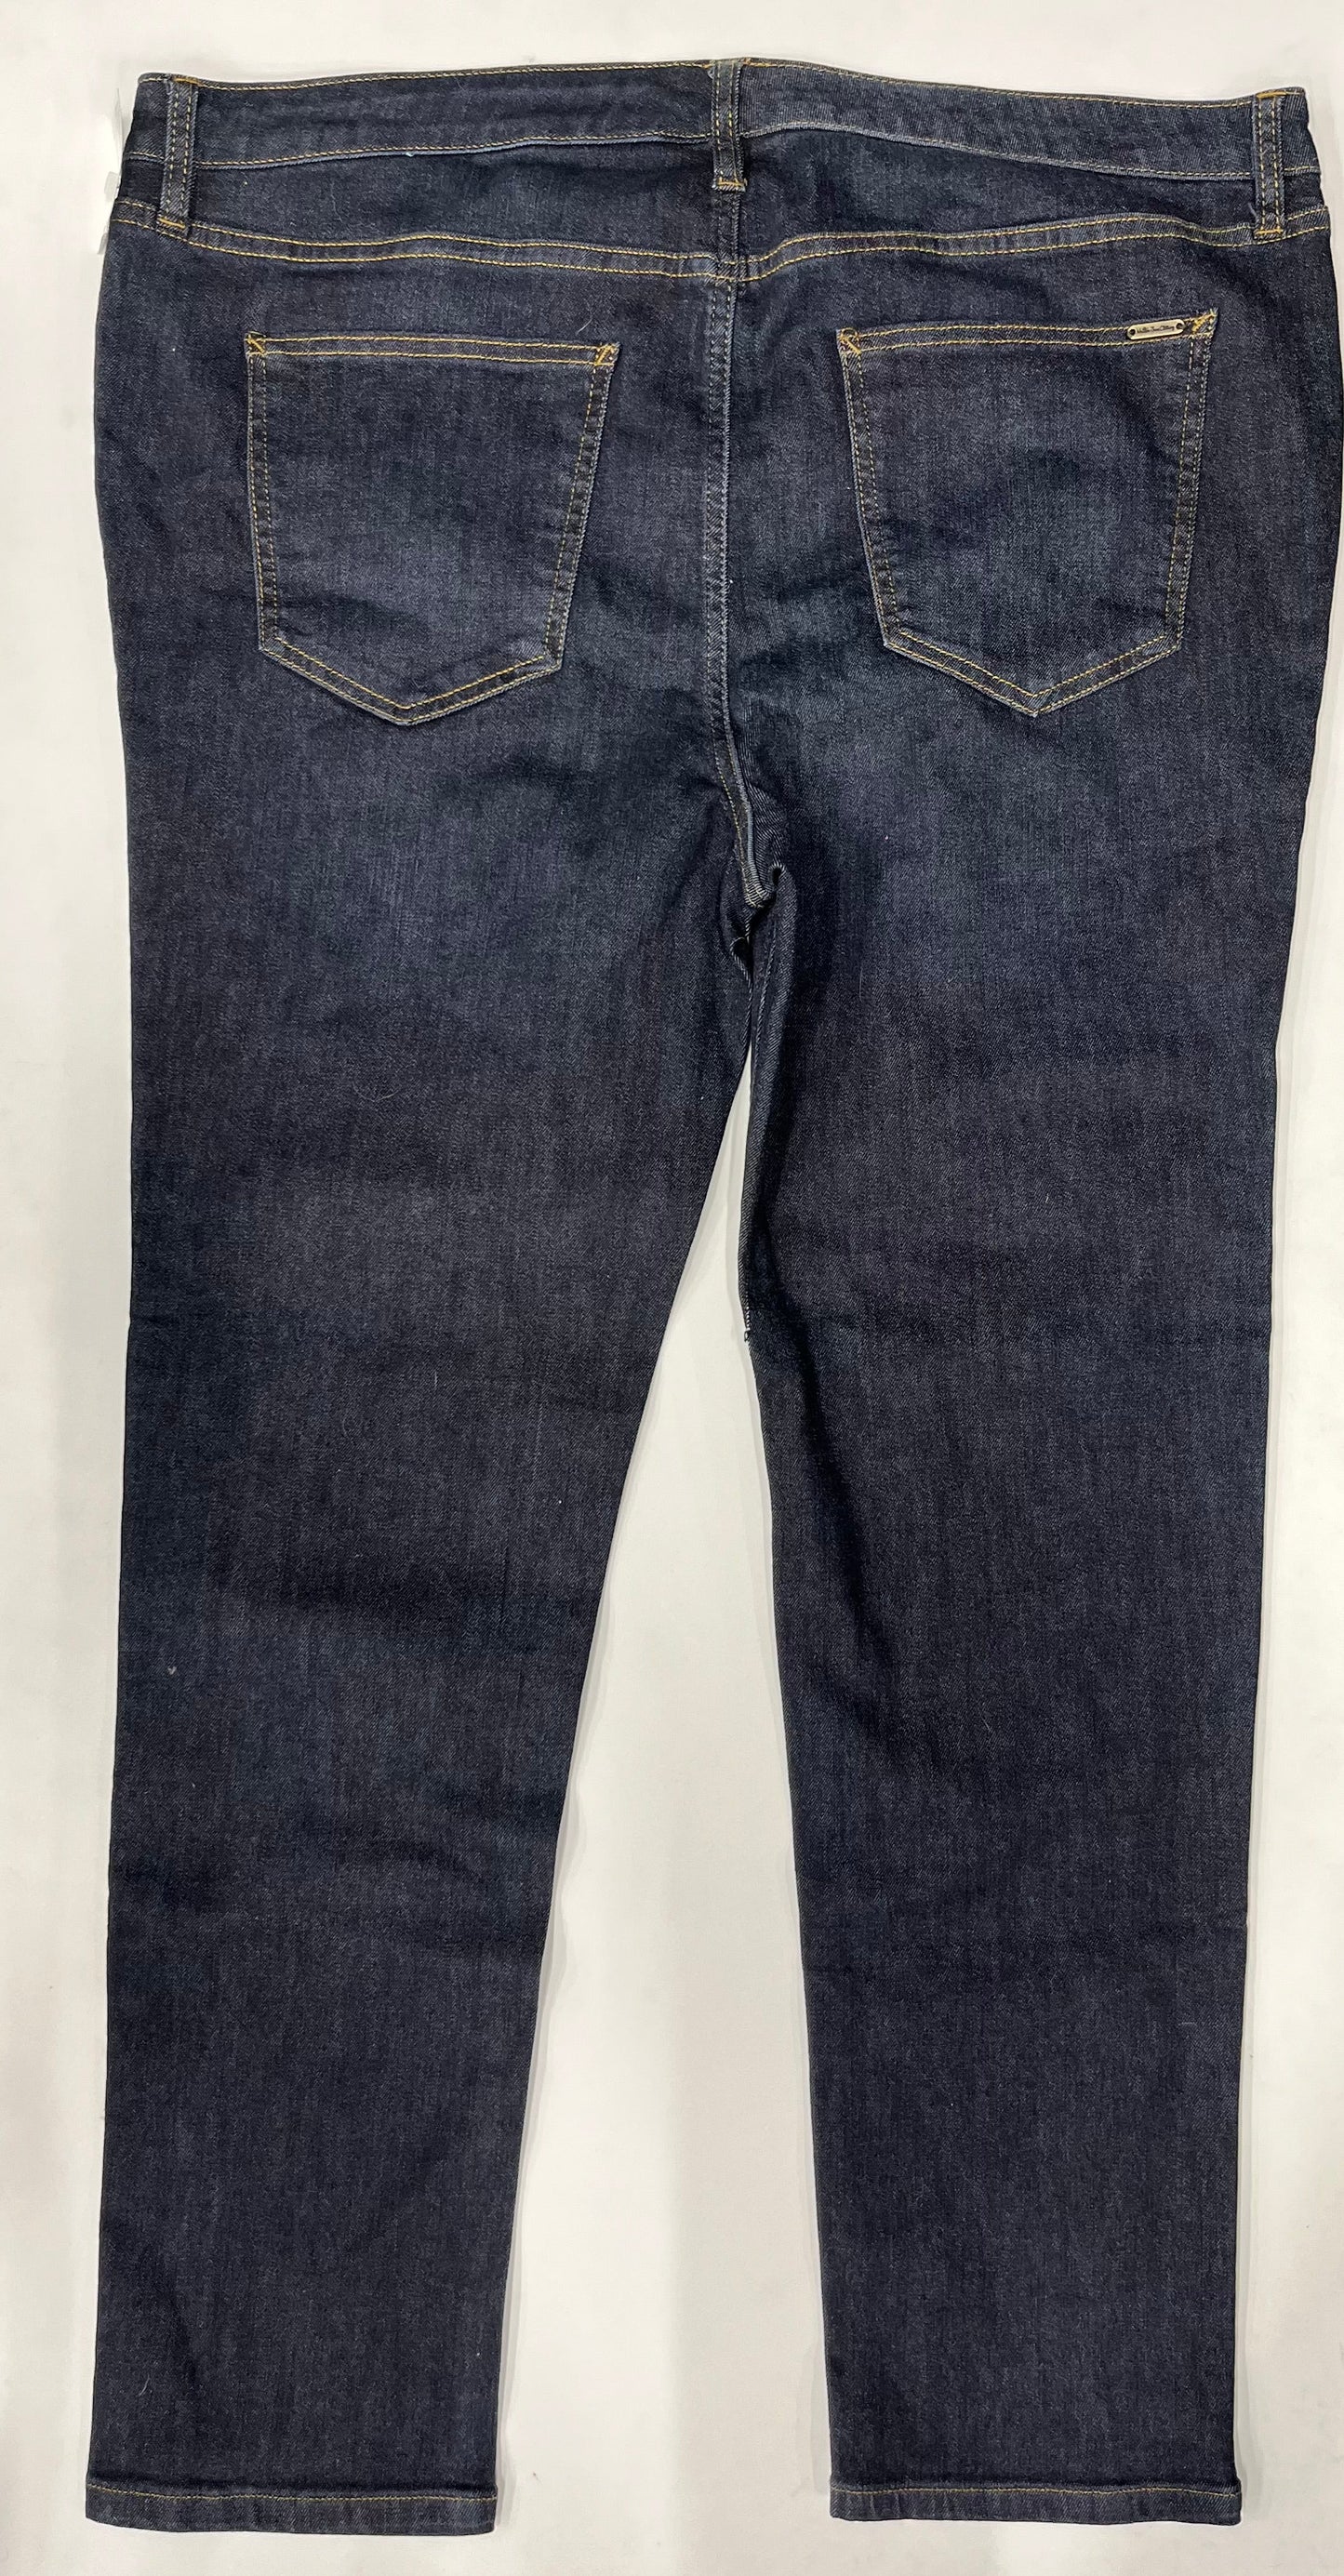 Jeans Straight By Matilda Jane NWT Size: 20